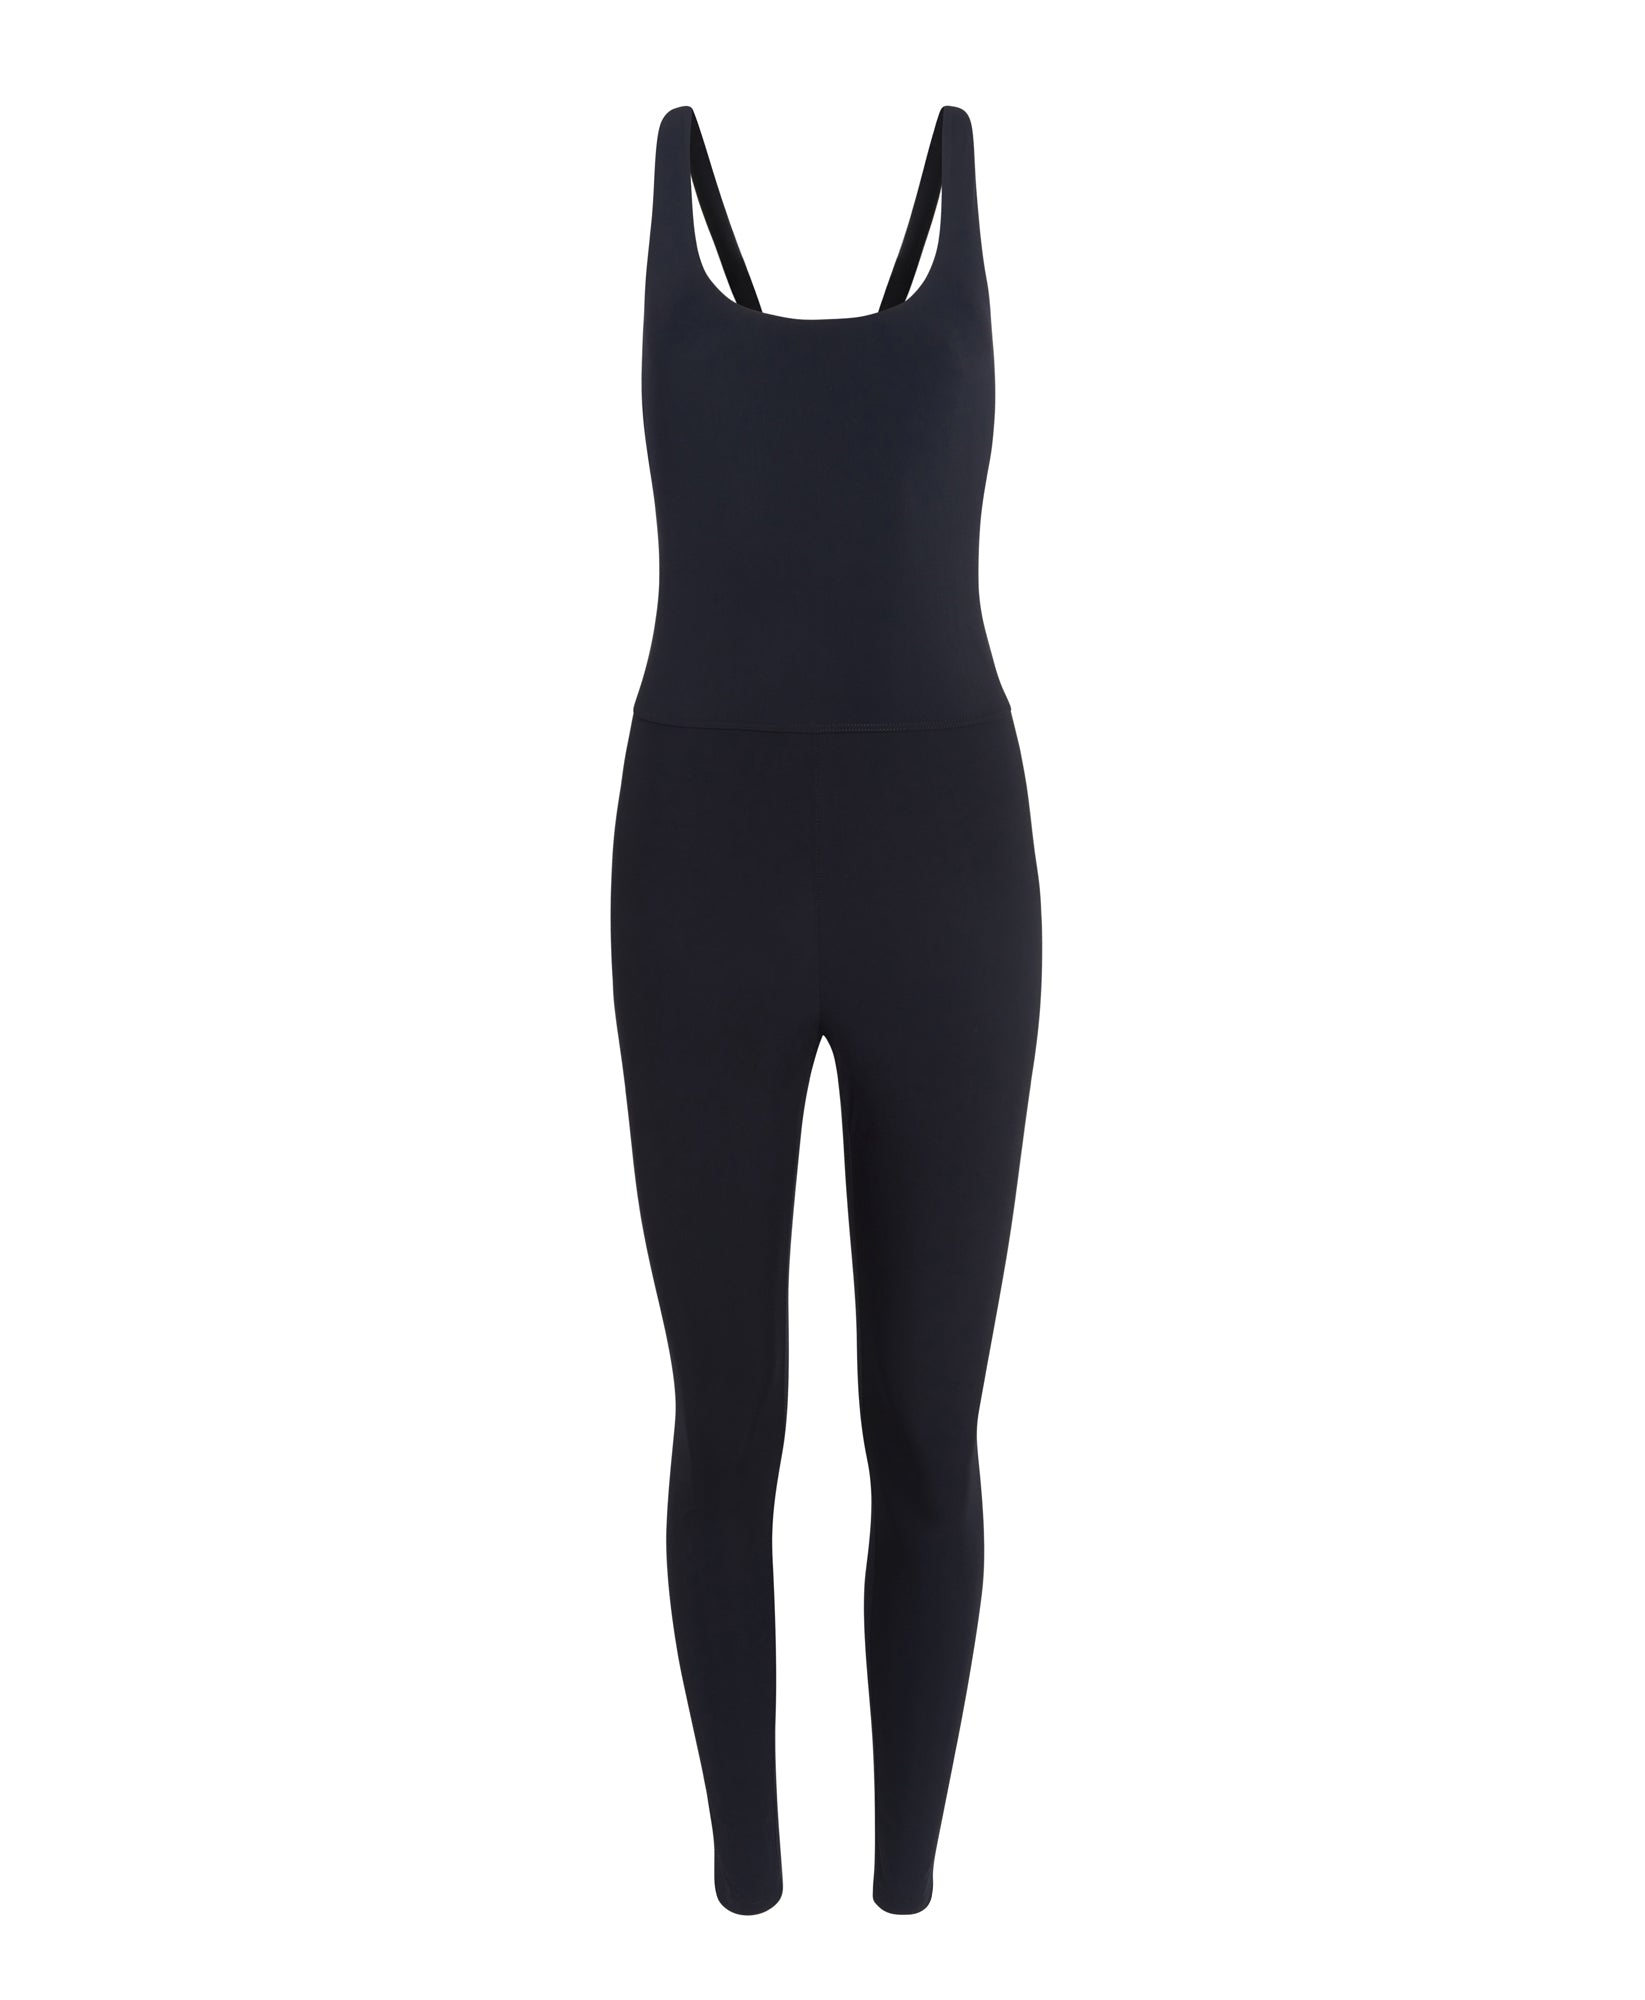 Women's Unitards- Wear One's At